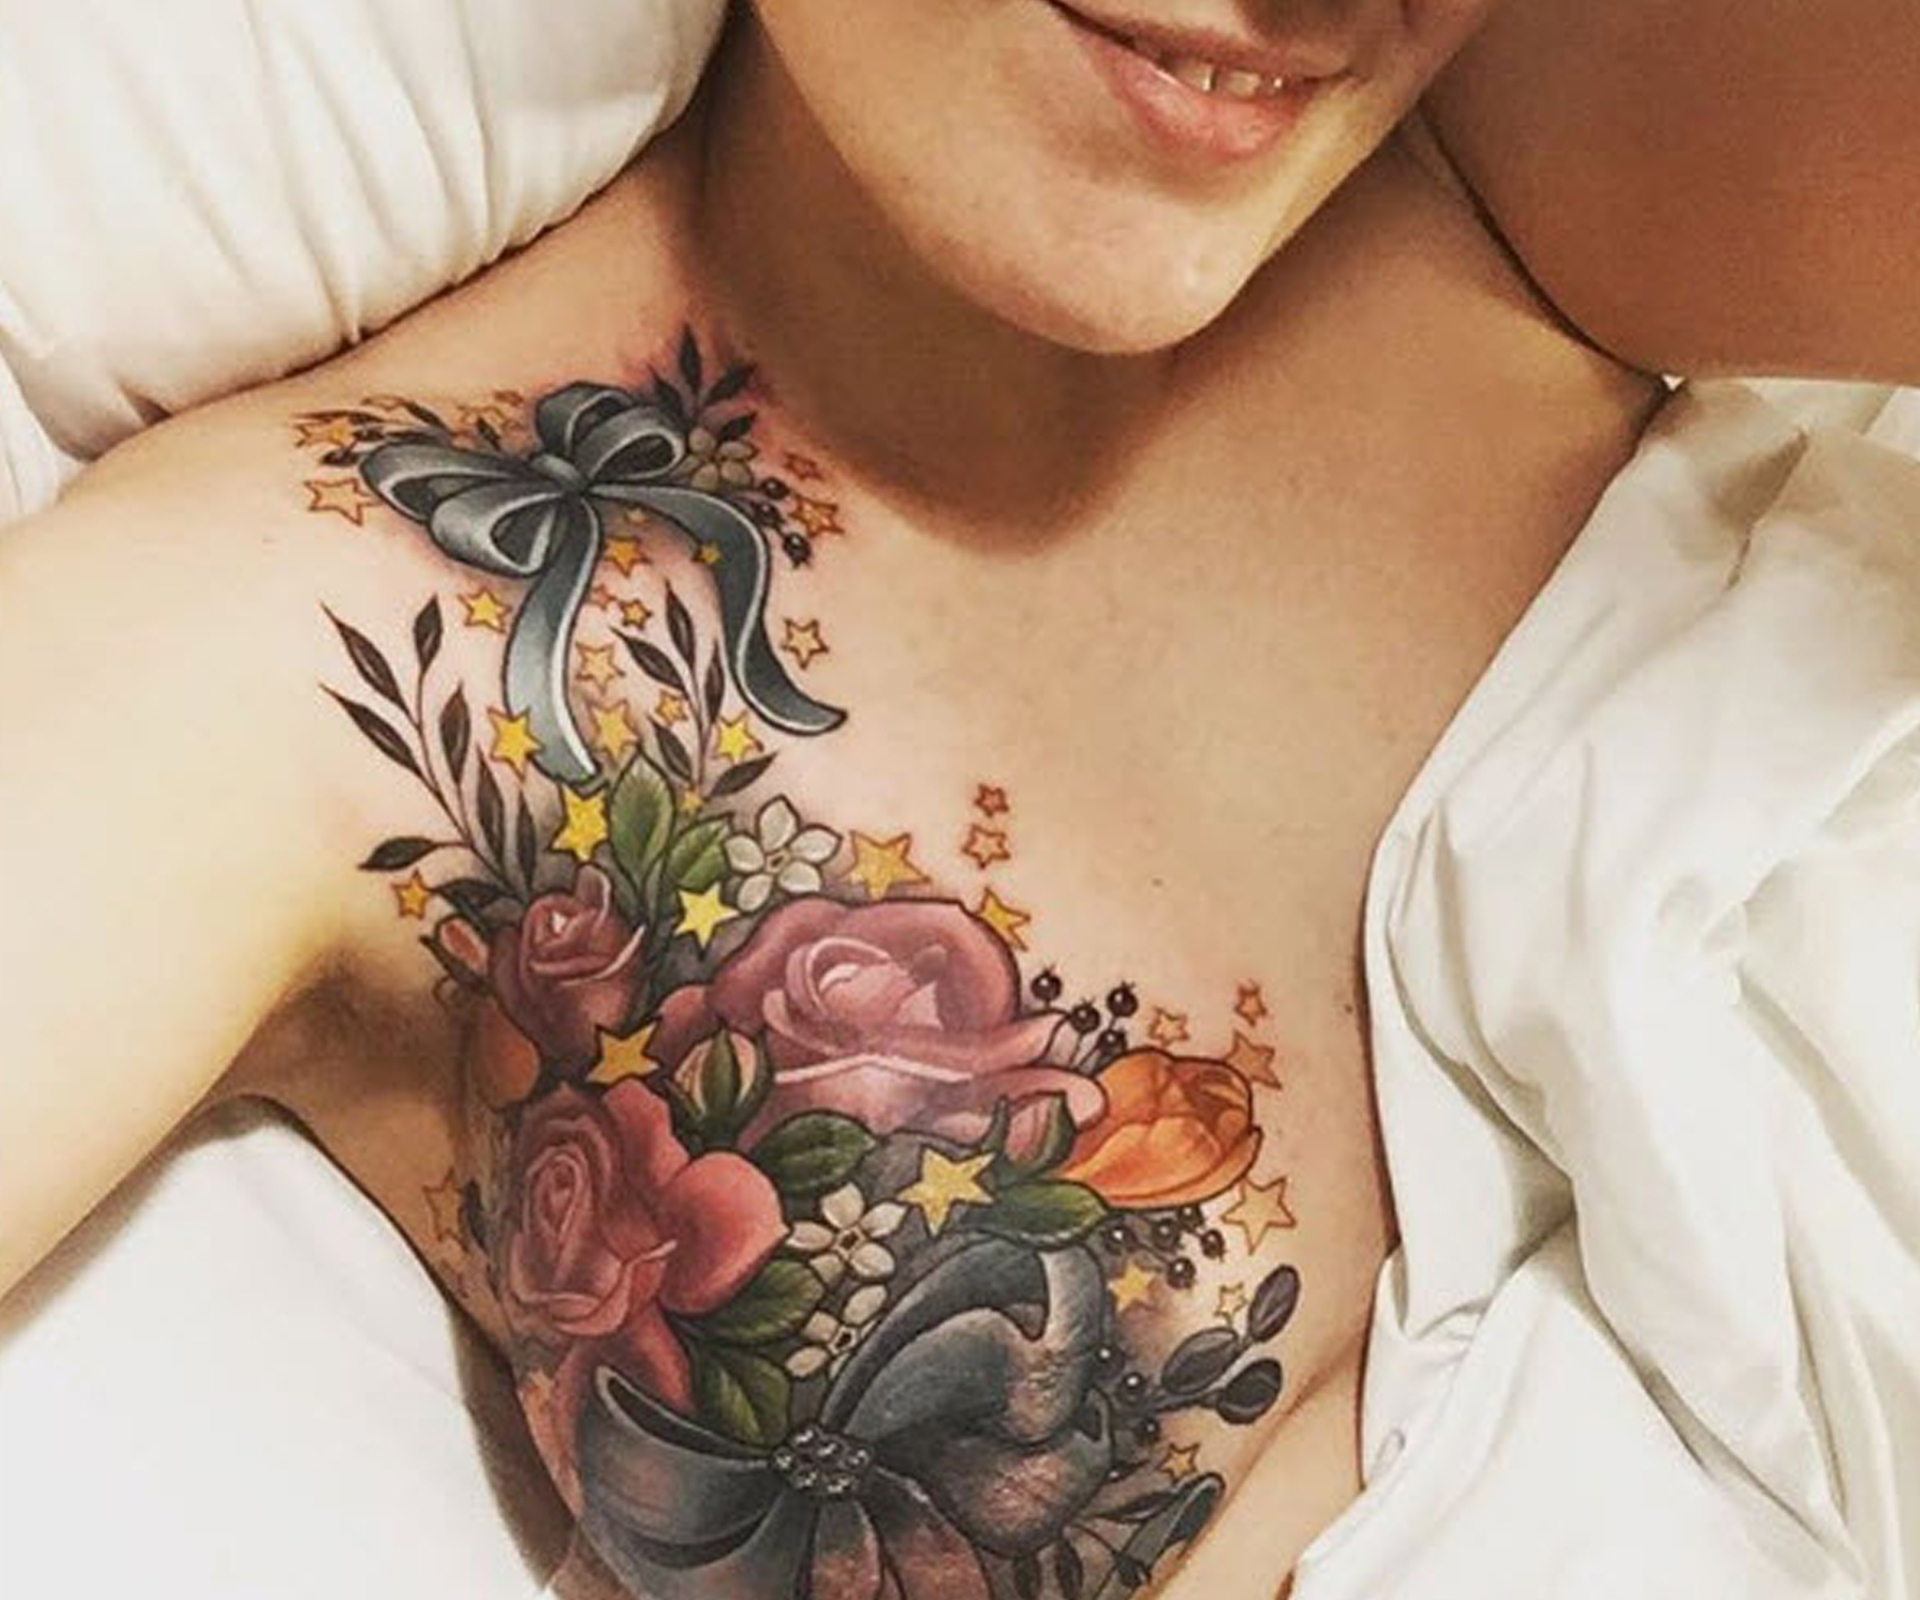 Tattoo cover-up transforms cancer surgery scars